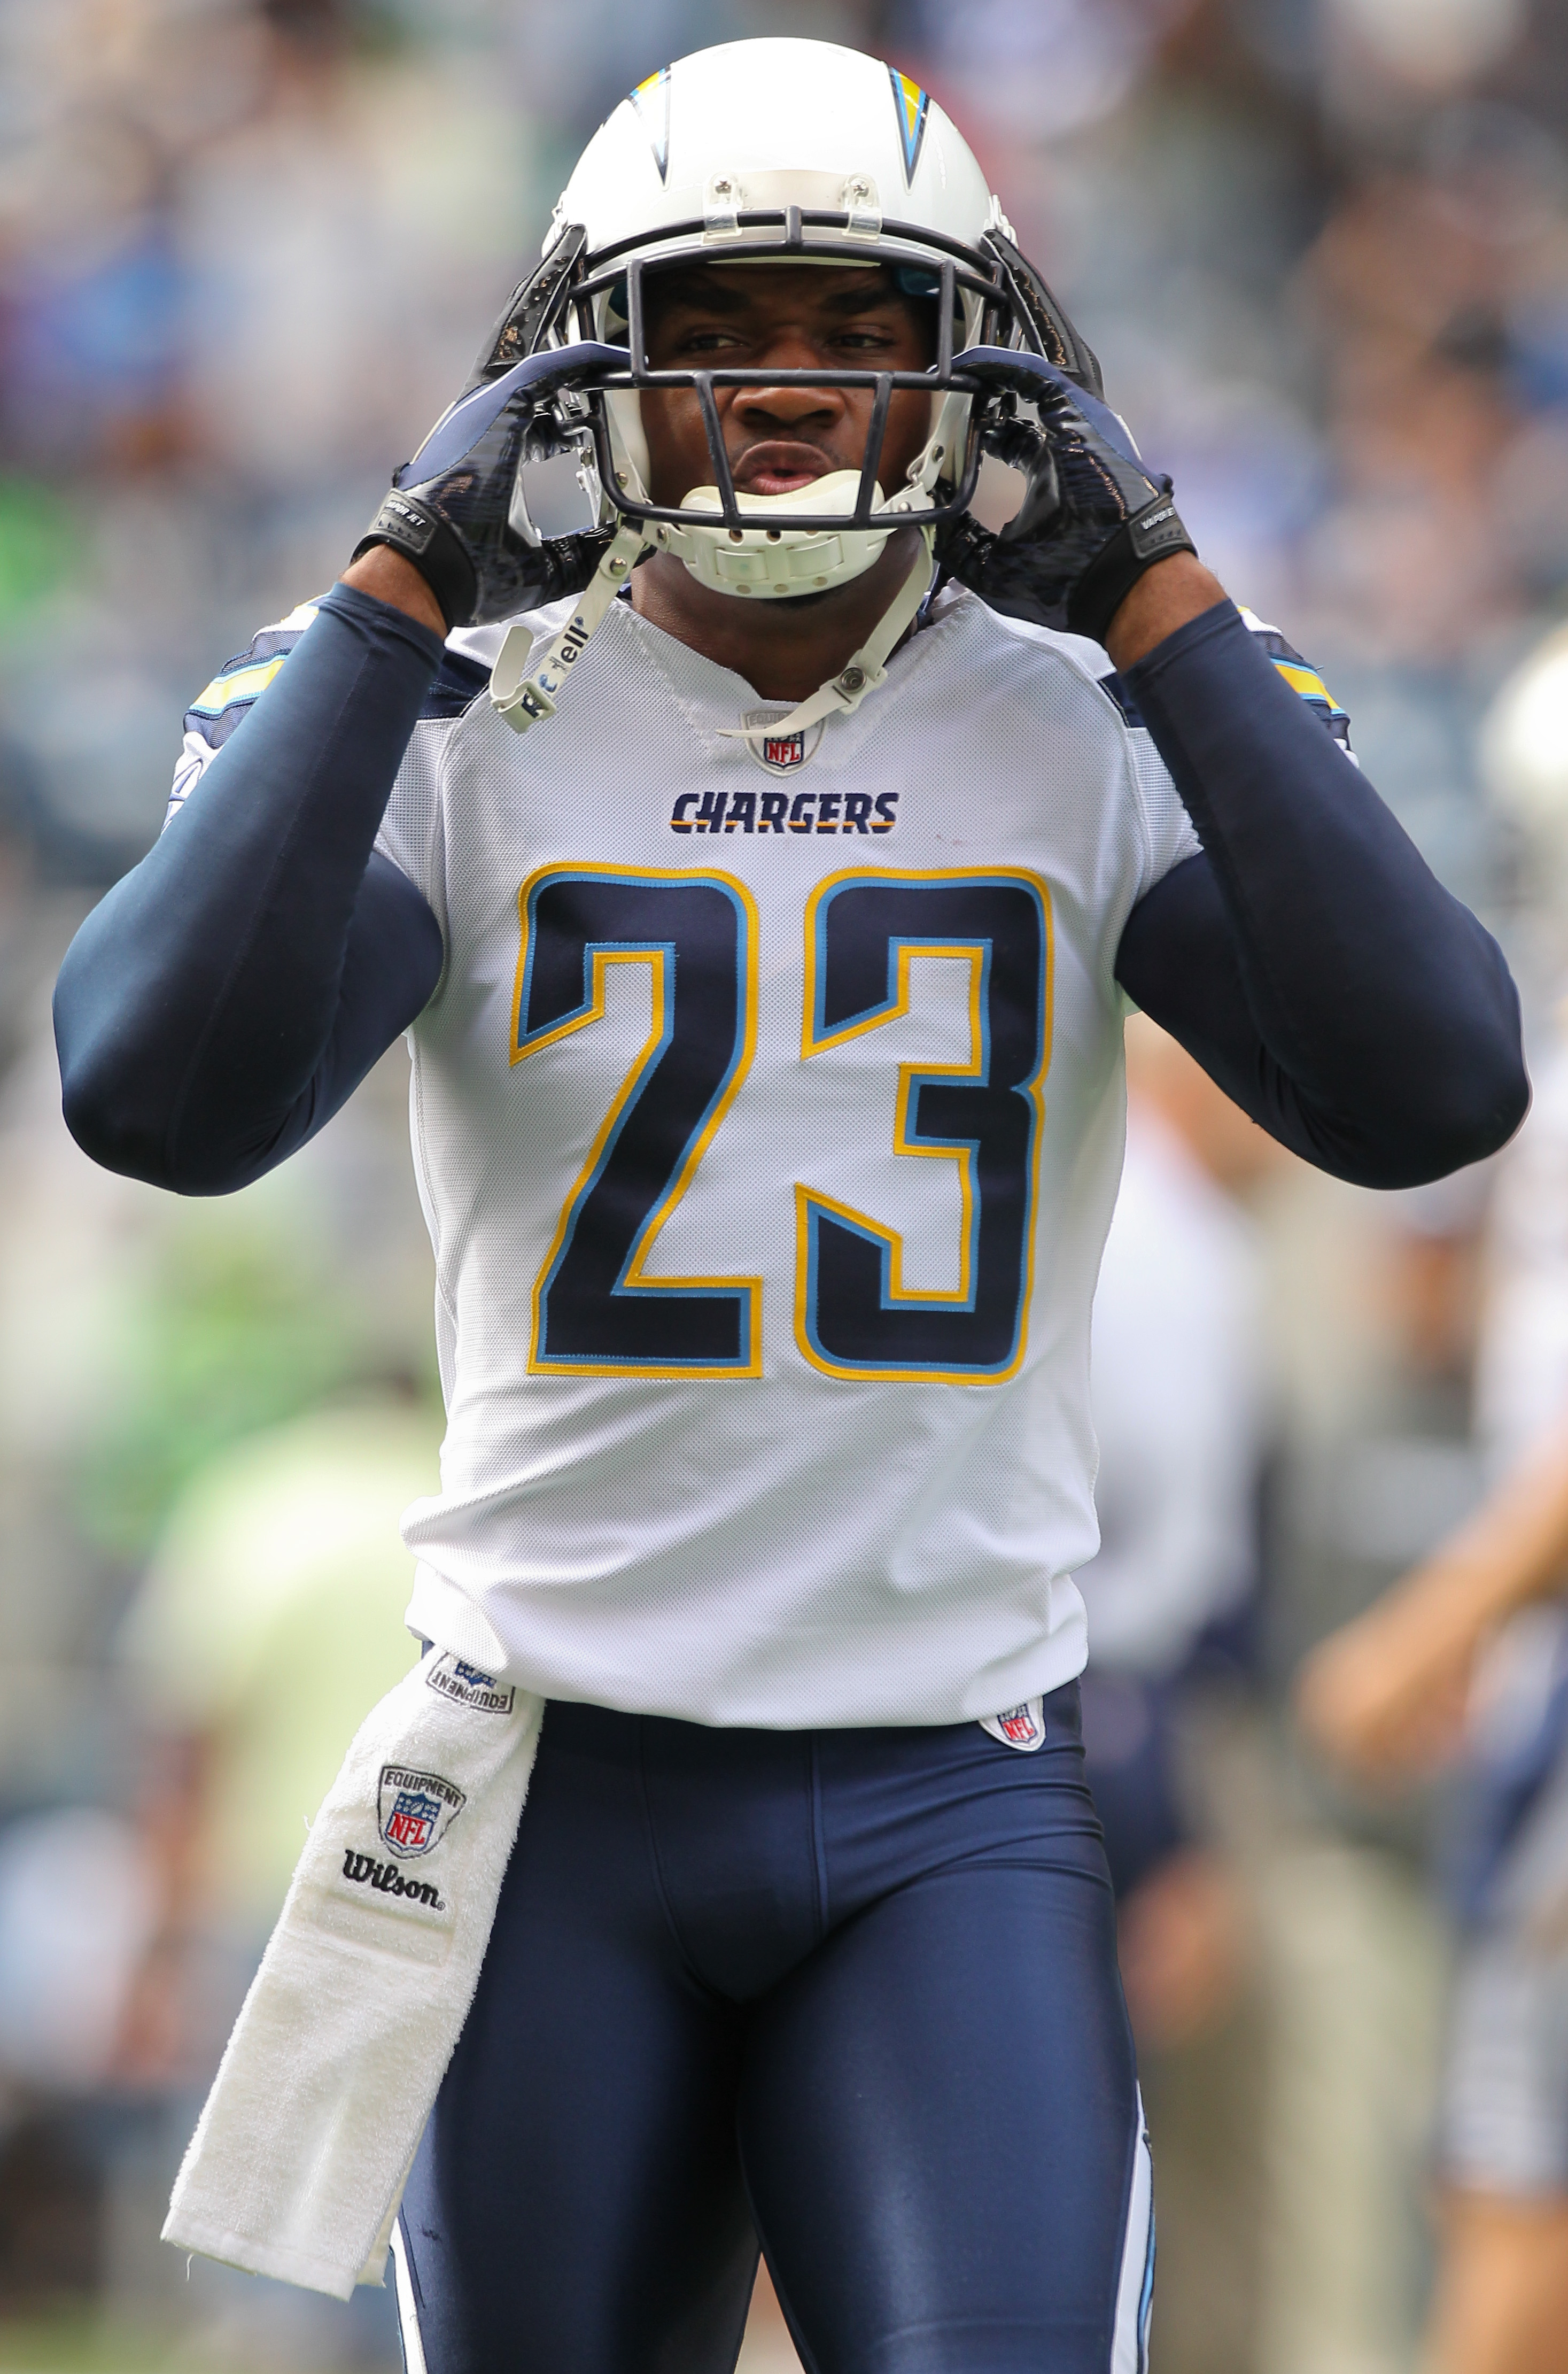 SEATTLE - SEPTEMBER 26:  Cornerback Quentin Jammer #23 of the San Diego Chargers looks on during warmups prior to the game  against the Seattle Seahawks at Qwest Field on September 26, 2010 in Seattle, Washington. (Photo by Otto Greule Jr/Getty Images)